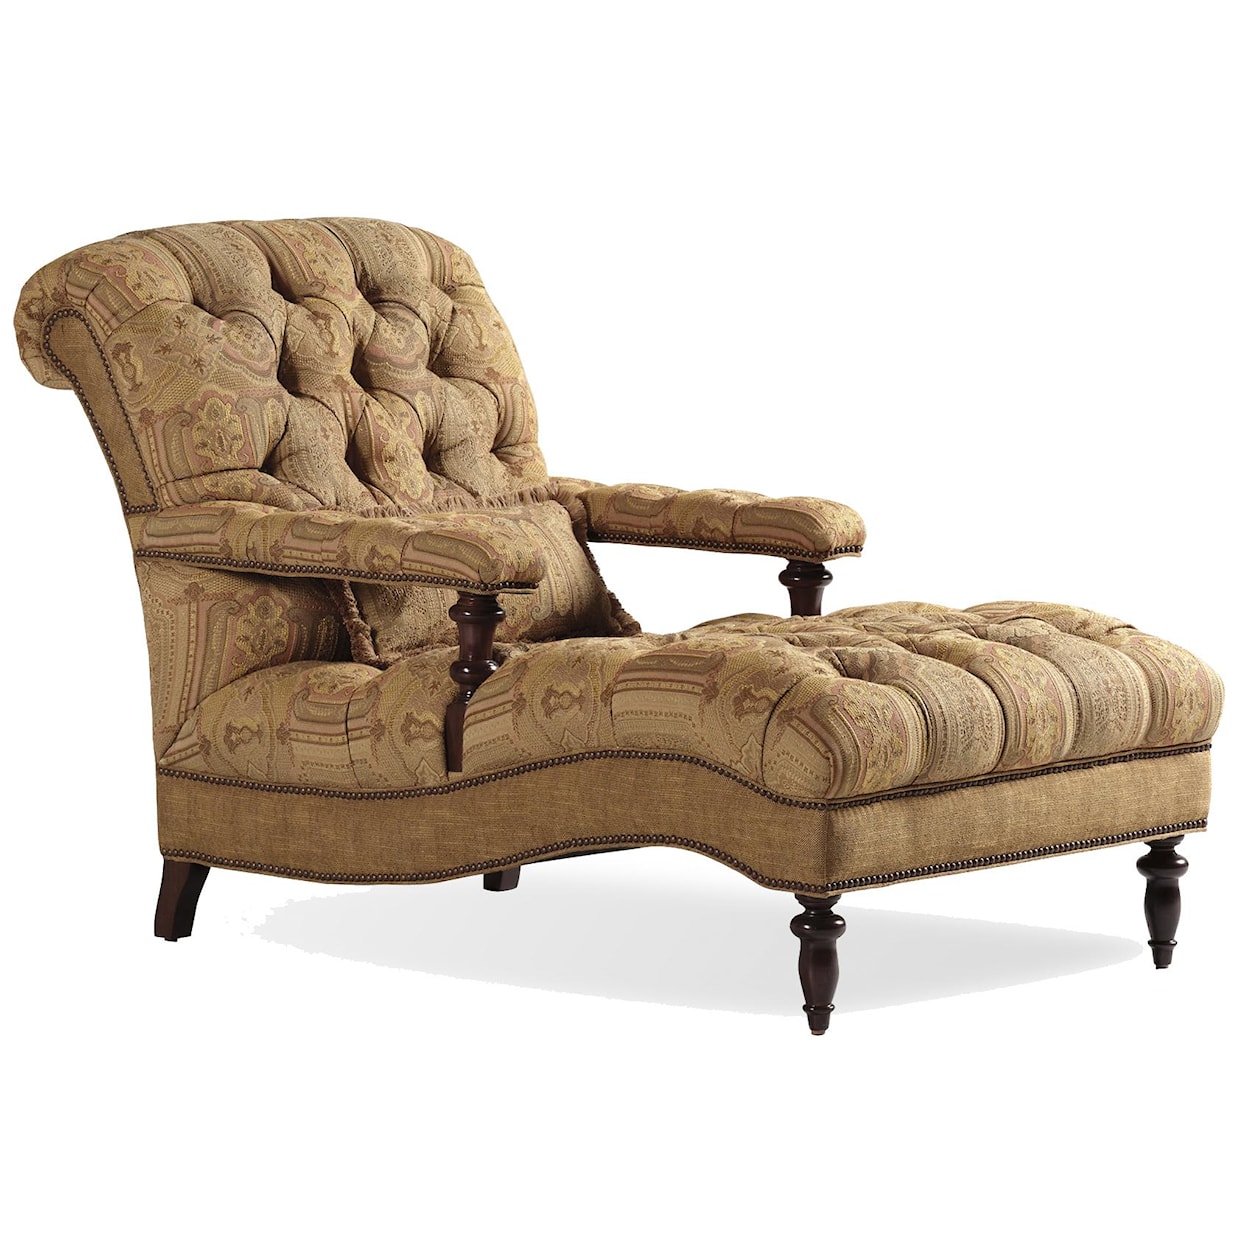 Jessica Charles Fine Upholstered Accents Charlesworth Chaise   